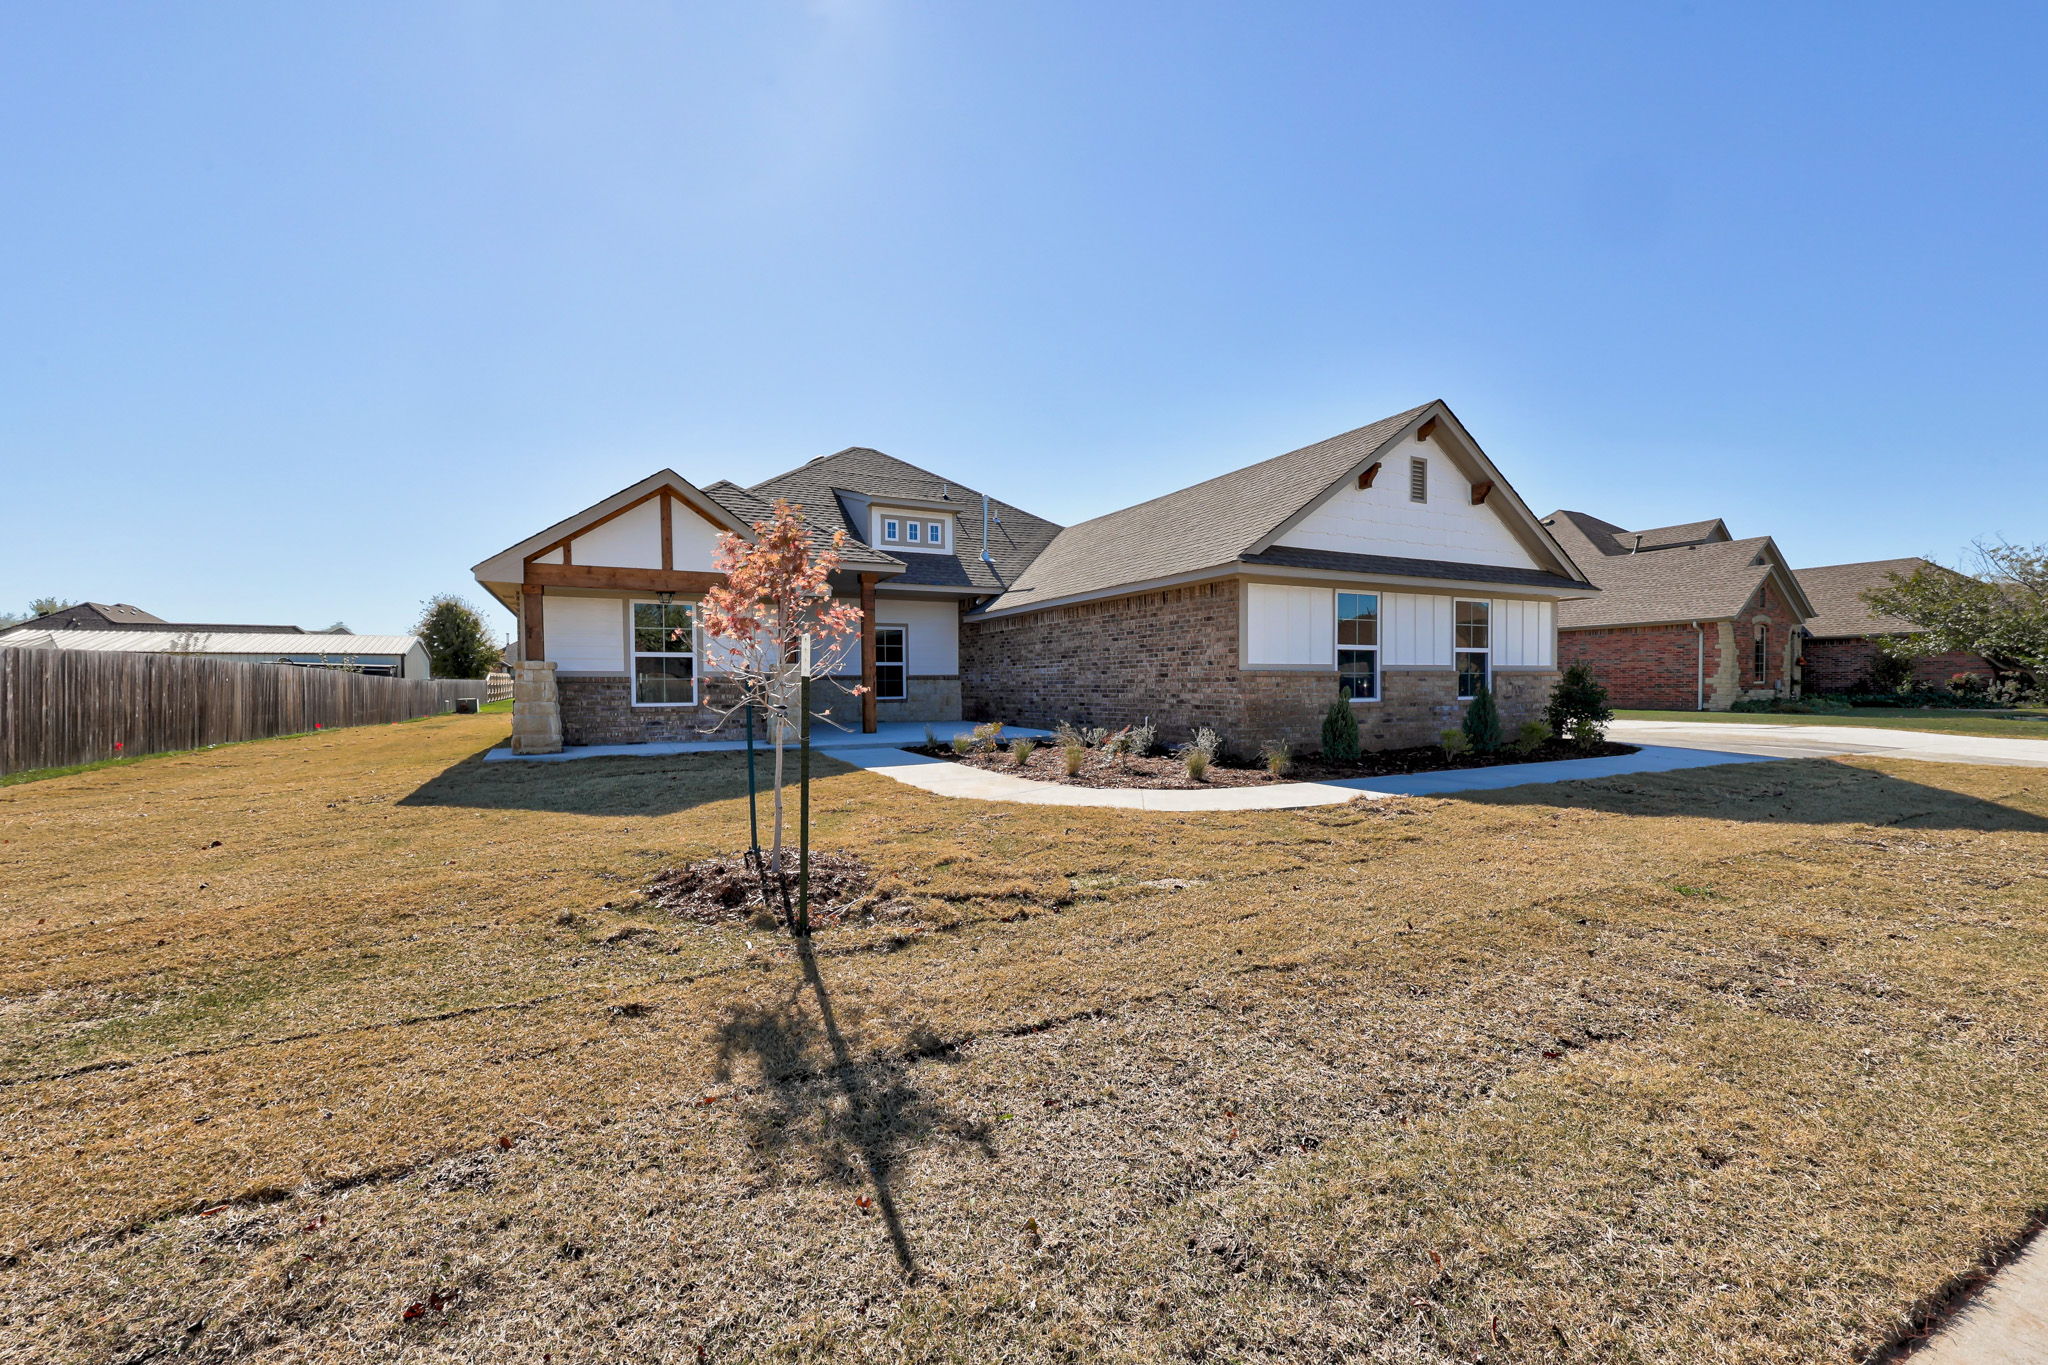 512 Cantebury, Tuttle, Oklahoma 73089, 4 Bedrooms Bedrooms, ,3 BathroomsBathrooms,House,For Sale,Cantebury,1399